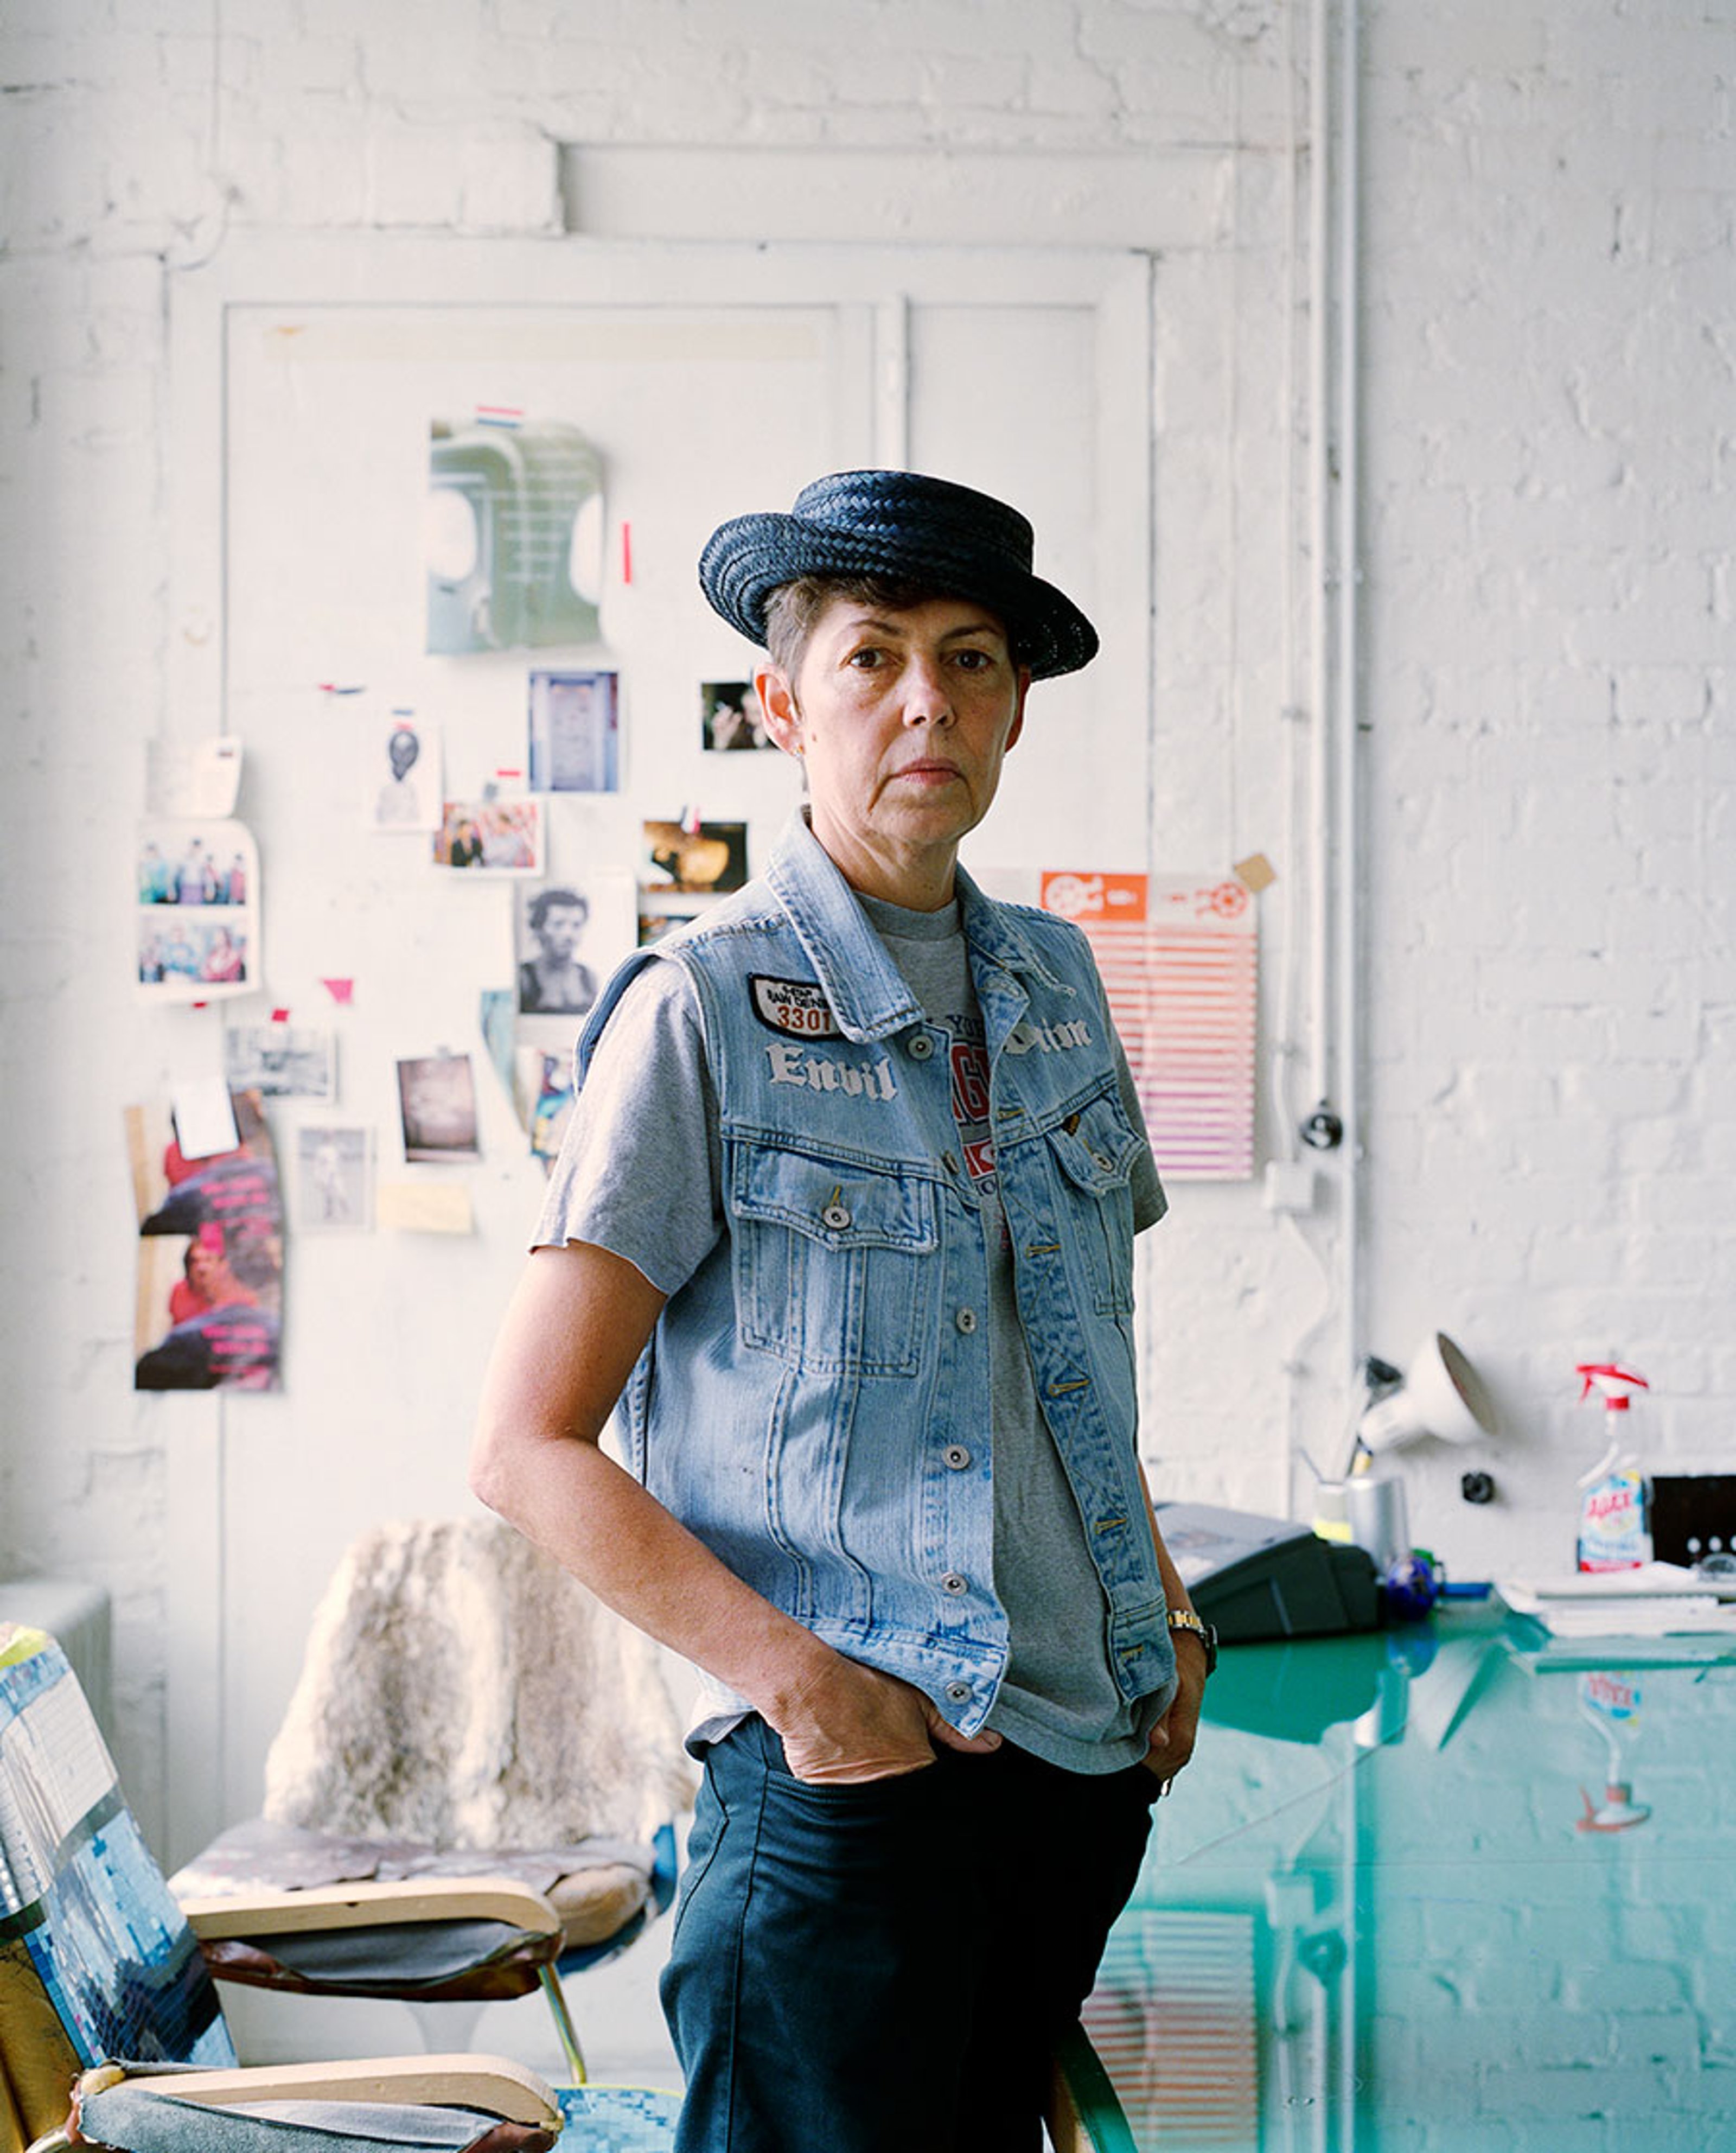 Photograph of Isa Genzken in her studio looking at the camera with a hat on and her hands in her pockets